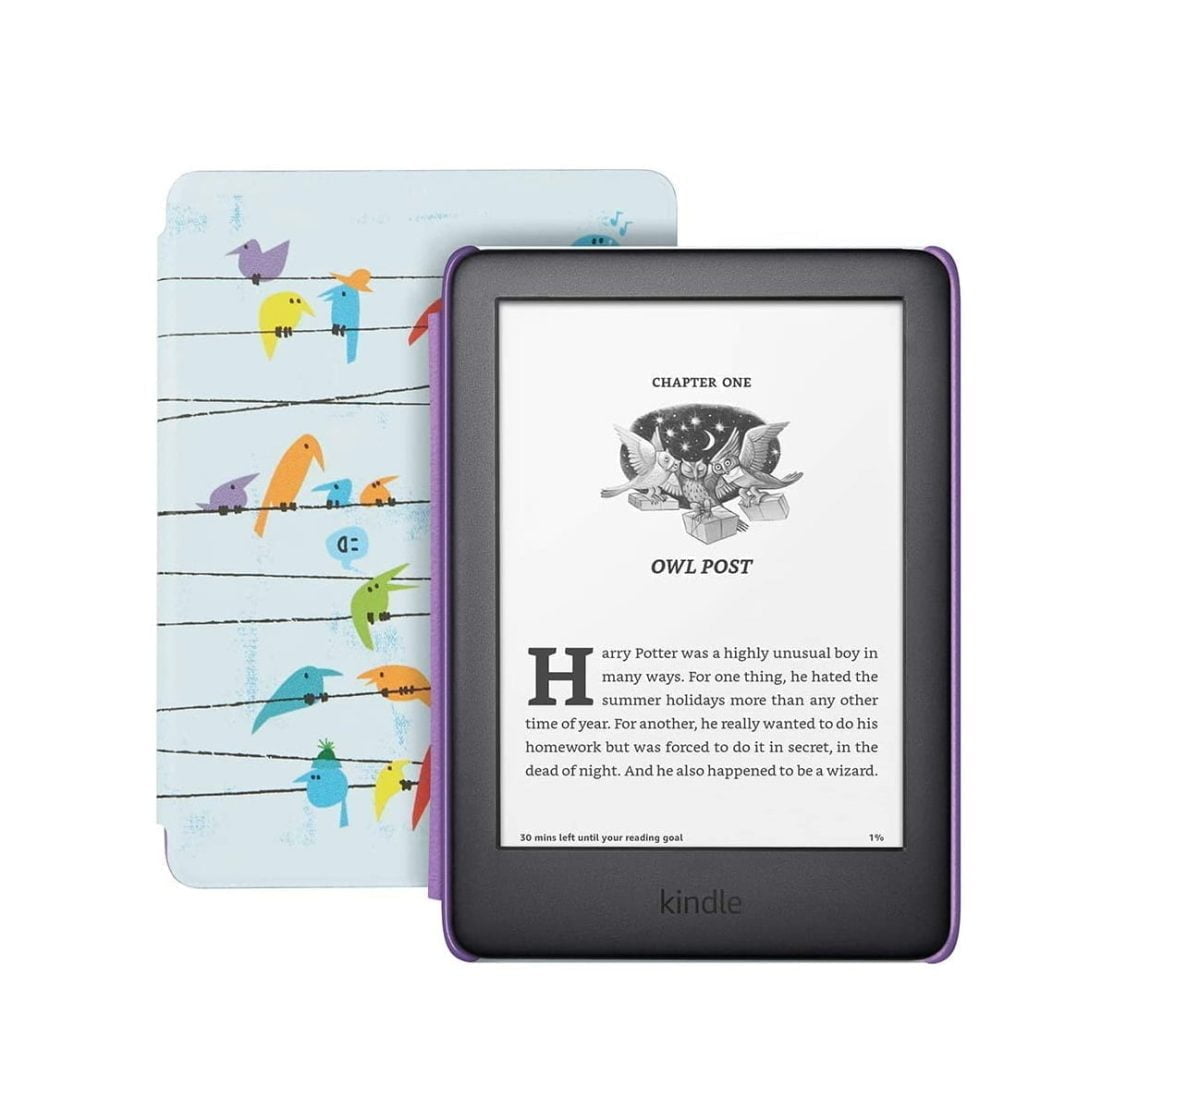 61 Amazon &Amp;Lt;H1&Amp;Gt;Kindle Kids Edition - Includes Cover - Rainbow Birds Cover&Amp;Lt;/H1&Amp;Gt; &Amp;Lt;Ul Class=&Amp;Quot;A-Unordered-List A-Vertical A-Spacing-Mini&Amp;Quot;&Amp;Gt; &Amp;Lt;Li&Amp;Gt;&Amp;Lt;Span Class=&Amp;Quot;A-List-Item&Amp;Quot;&Amp;Gt;Kindle Kids Edition Is Purpose-Built For Reading (Not A Toy), With A Black &Amp;Amp; White Glare-Free Display And Weeks Of Battery Life. It Performs Differently Than A Tablet, Because It’s Geared For Reading Books – No Games, Ads Or Videos Means Zero Distractions.&Amp;Lt;/Span&Amp;Gt;&Amp;Lt;/Li&Amp;Gt; &Amp;Lt;Li&Amp;Gt;&Amp;Lt;Span Class=&Amp;Quot;A-List-Item&Amp;Quot;&Amp;Gt;Amazon Kids+ Includes The Complete Harry Potter Series, And The First Book From Other Popular Series Such As Artemis Fowl. Parents Can Purchase Additional Titles From The Kindle Store.&Amp;Lt;/Span&Amp;Gt;&Amp;Lt;/Li&Amp;Gt; &Amp;Lt;Li&Amp;Gt;&Amp;Lt;Span Class=&Amp;Quot;A-List-Item&Amp;Quot;&Amp;Gt;Take The Library With You. Kindle Kids Edition Holds Over A Thousand Amazon Kids+ Titles And Provides Weeks Of Battery Life.&Amp;Lt;/Span&Amp;Gt;&Amp;Lt;/Li&Amp;Gt; &Amp;Lt;Li&Amp;Gt;&Amp;Lt;Span Class=&Amp;Quot;A-List-Item&Amp;Quot;&Amp;Gt;Now With Audible. Pair With Bluetooth Headphones Or Speakers To Listen To Your Story.&Amp;Lt;/Span&Amp;Gt;&Amp;Lt;/Li&Amp;Gt; &Amp;Lt;/Ul&Amp;Gt; &Amp;Lt;Strong&Amp;Gt;Included In The Box&Amp;Lt;/Strong&Amp;Gt; Kindle, Cover, Usb 2.0 Charging Cable And &Amp;Lt;A Href=&Amp;Quot;Https://Customerdocumentation.s3-Us-West-2.Amazonaws.com/Ej/Kindle+Kids+Edition_Quick_Start_Guide_Us.pdf&Amp;Quot;&Amp;Gt;Quick Start Guide&Amp;Lt;/A&Amp;Gt;. &Amp;Lt;Strong&Amp;Gt;Age Range&Amp;Lt;/Strong&Amp;Gt; Ages 7 And Up. &Amp;Lt;Strong&Amp;Gt;Generation&Amp;Lt;/Strong&Amp;Gt; Kindle 10Th Generation - 2019 Release. &Amp;Lt;Strong&Amp;Gt;Colors&Amp;Lt;/Strong&Amp;Gt; Black Kindle With Pink/Blue/Rainbow Birds/Space Station Cover. Kindle Kids Kindle Kids Edition - Includes Cover - Rainbow Birds Cover